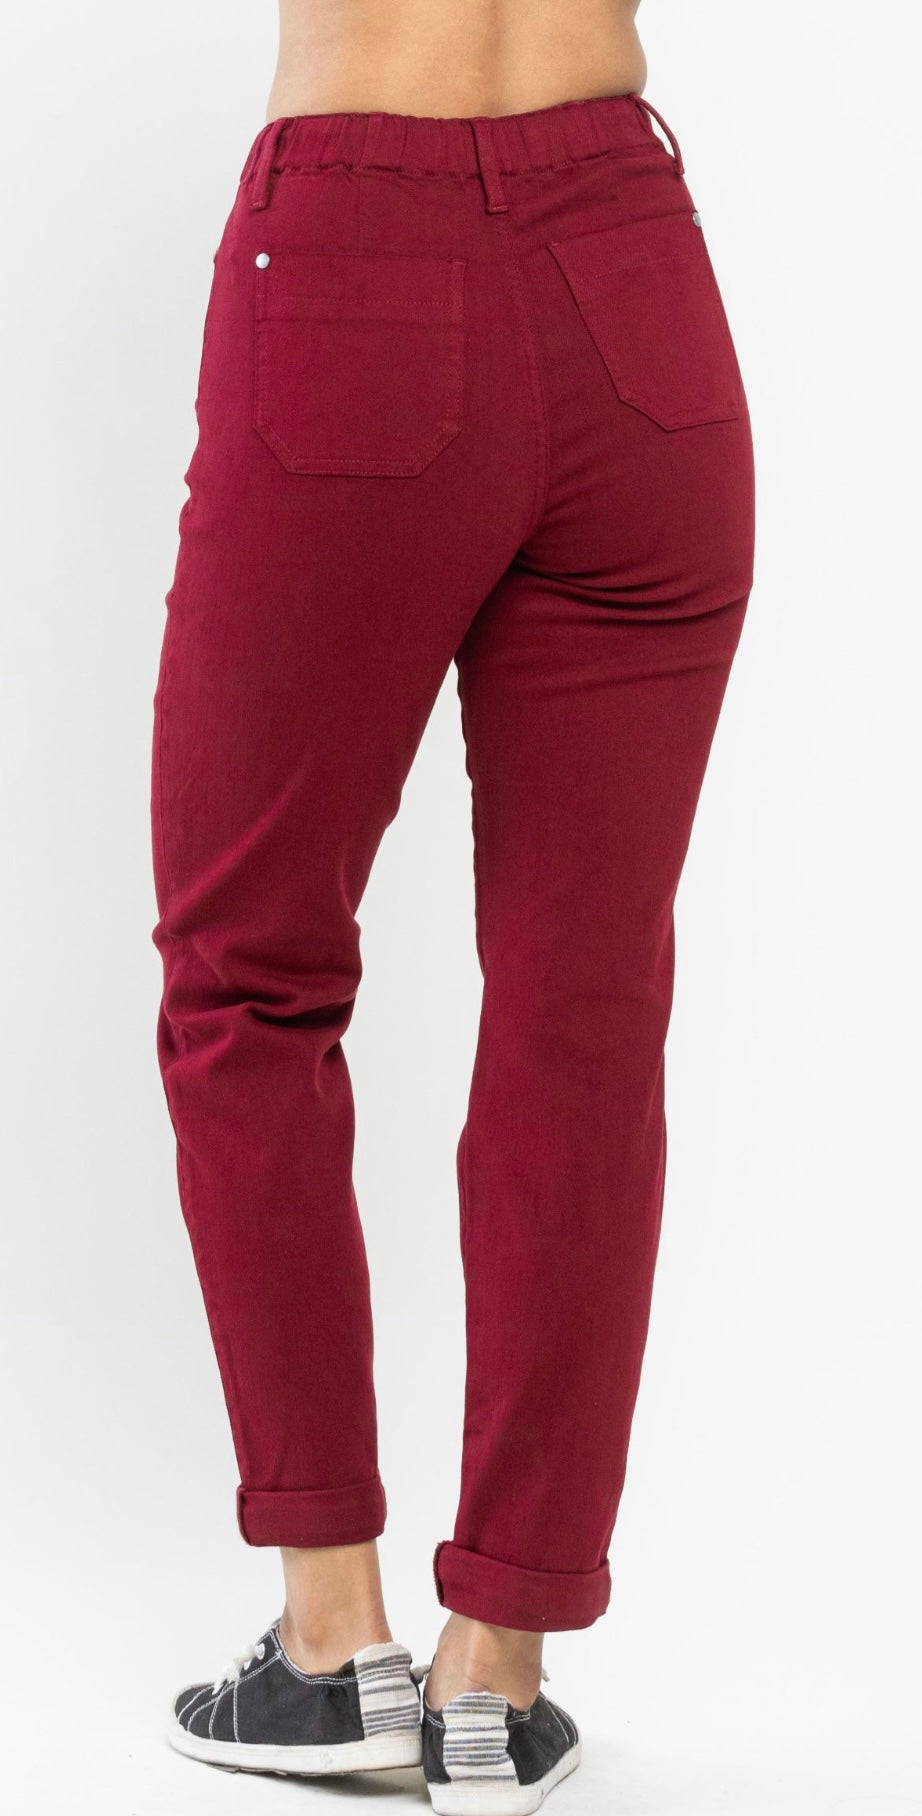 Red hot joggers